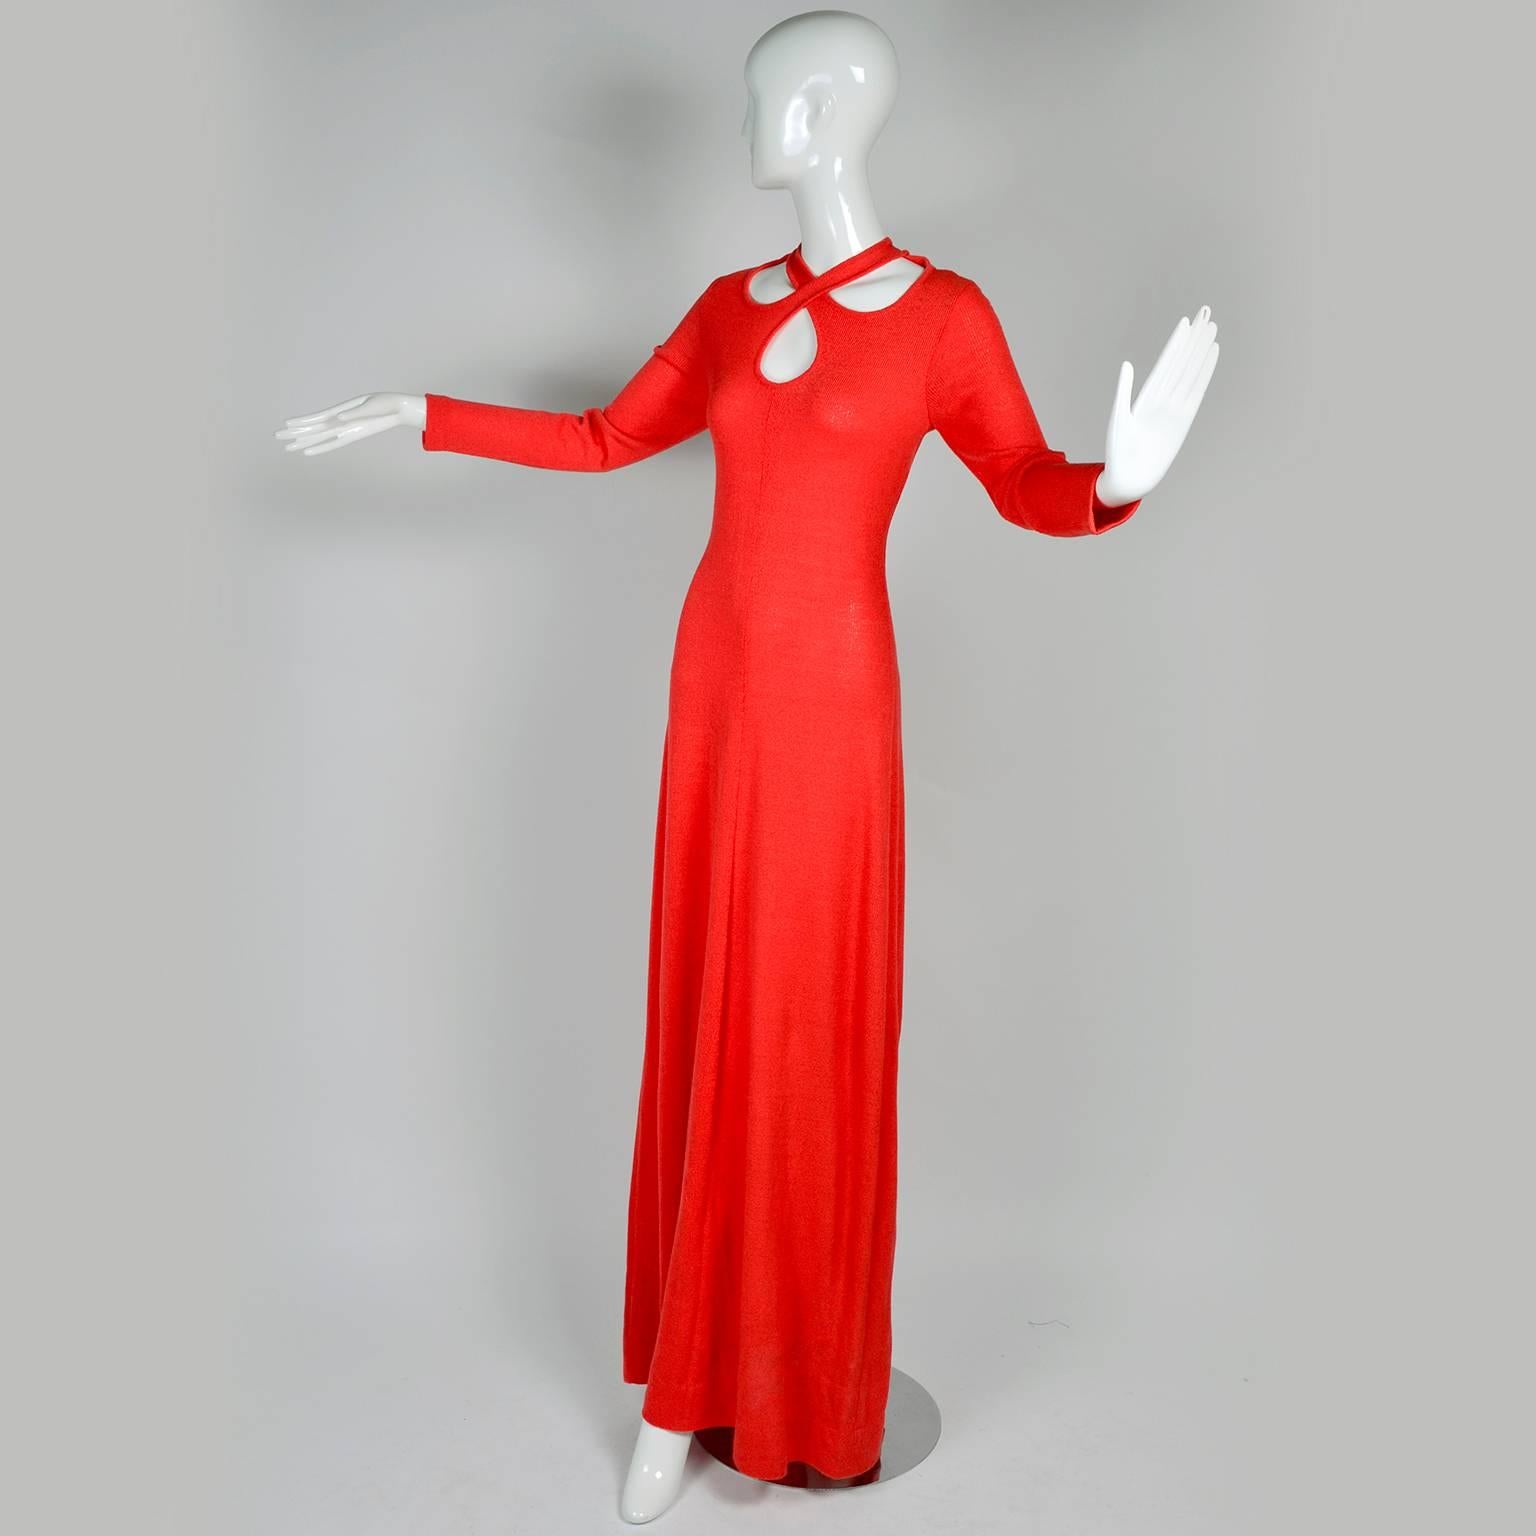 Women's 1970s Orange Red Knit Dress With Keyhole Openings Made in Italy